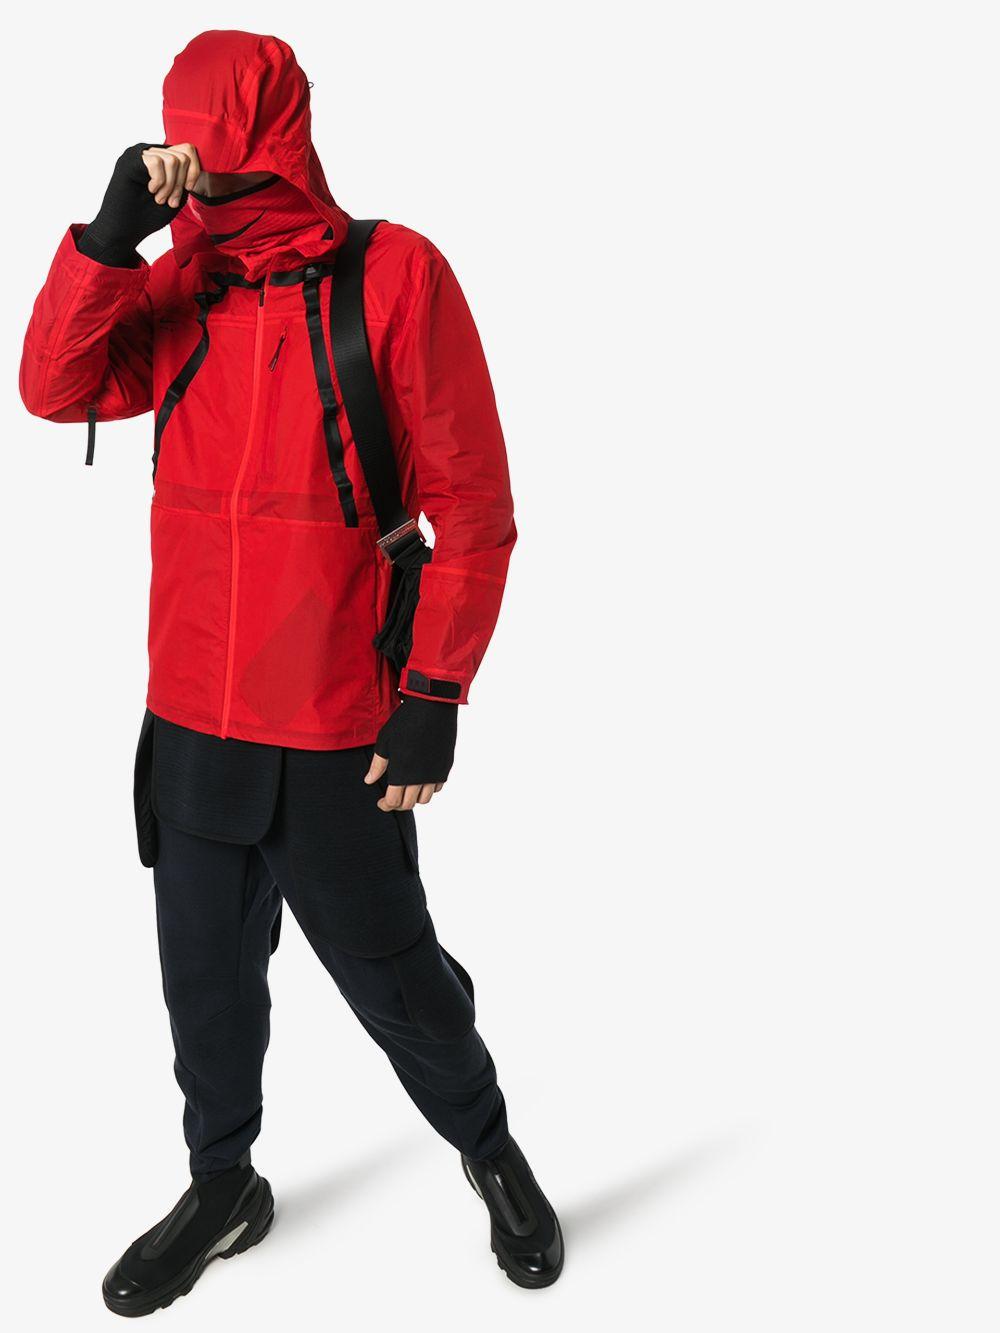 Nike X Mmw Hooded Nylon Jacket in Red for Men | Lyst